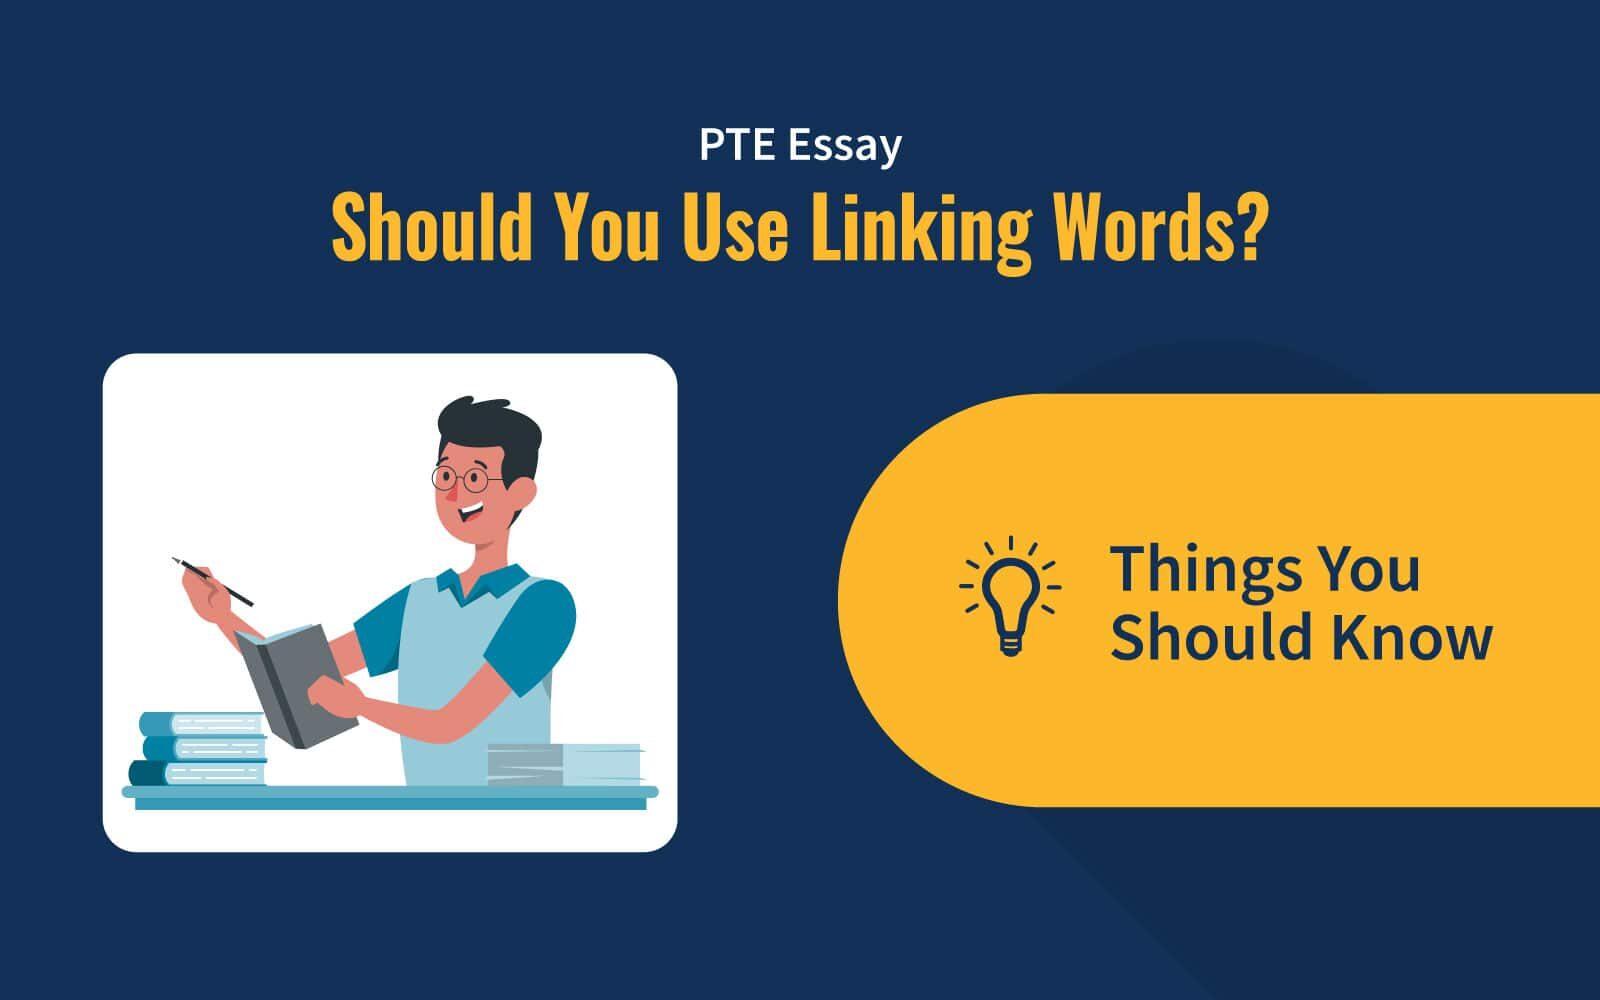 PTE Essay: Should You Use Linking Words?